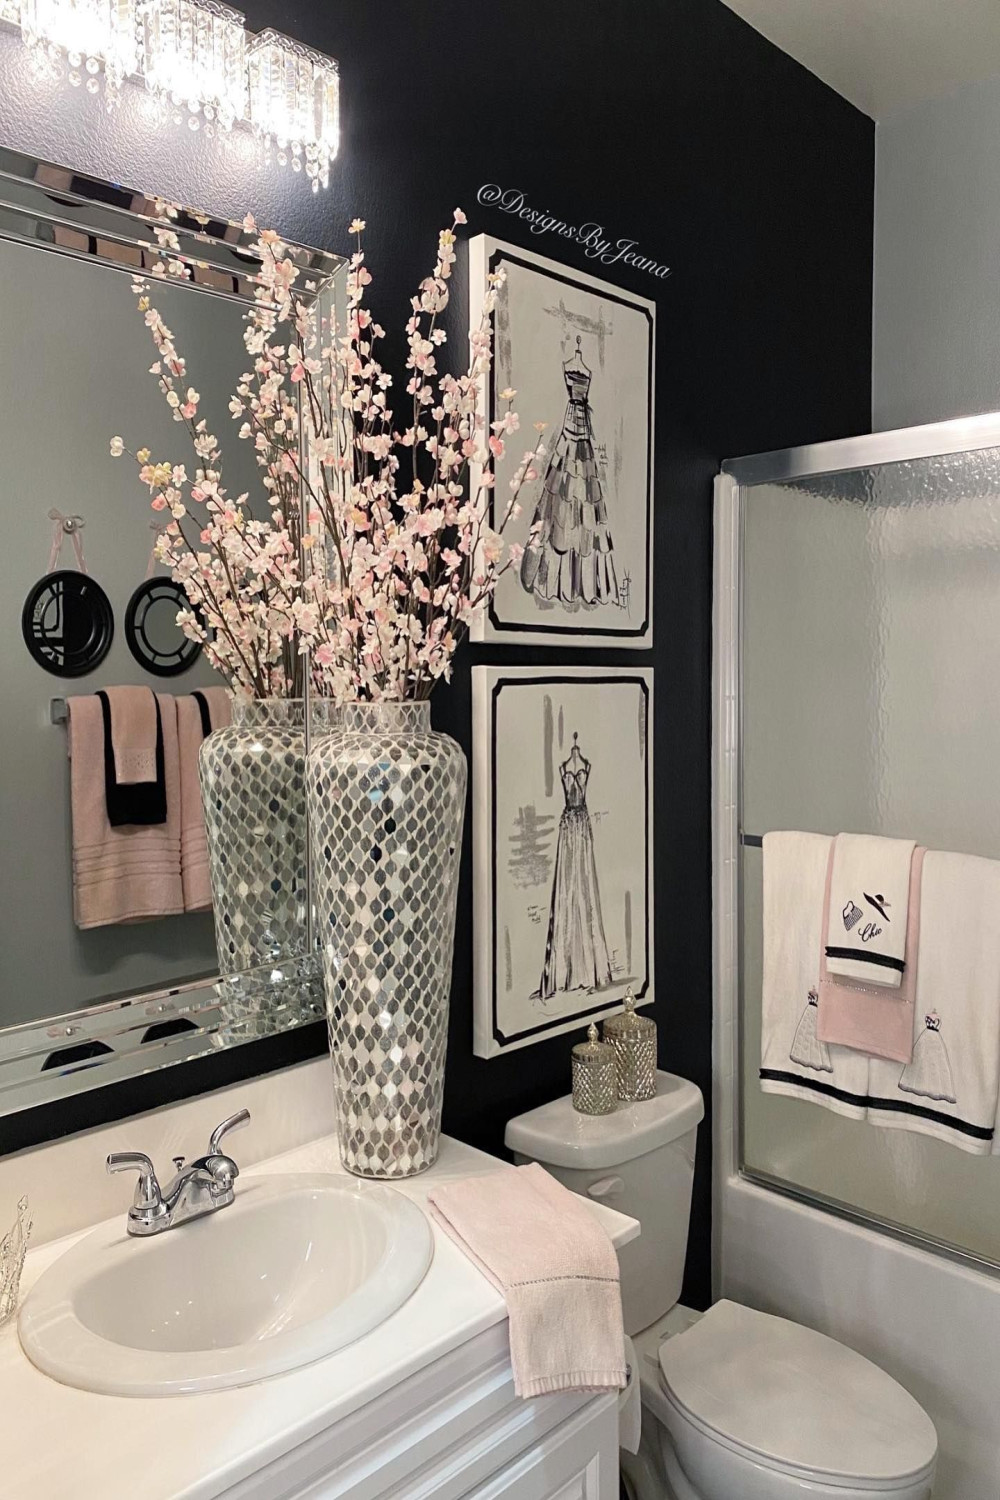 Five Things You Can Do to Create a Glam Bathroom - Designs by